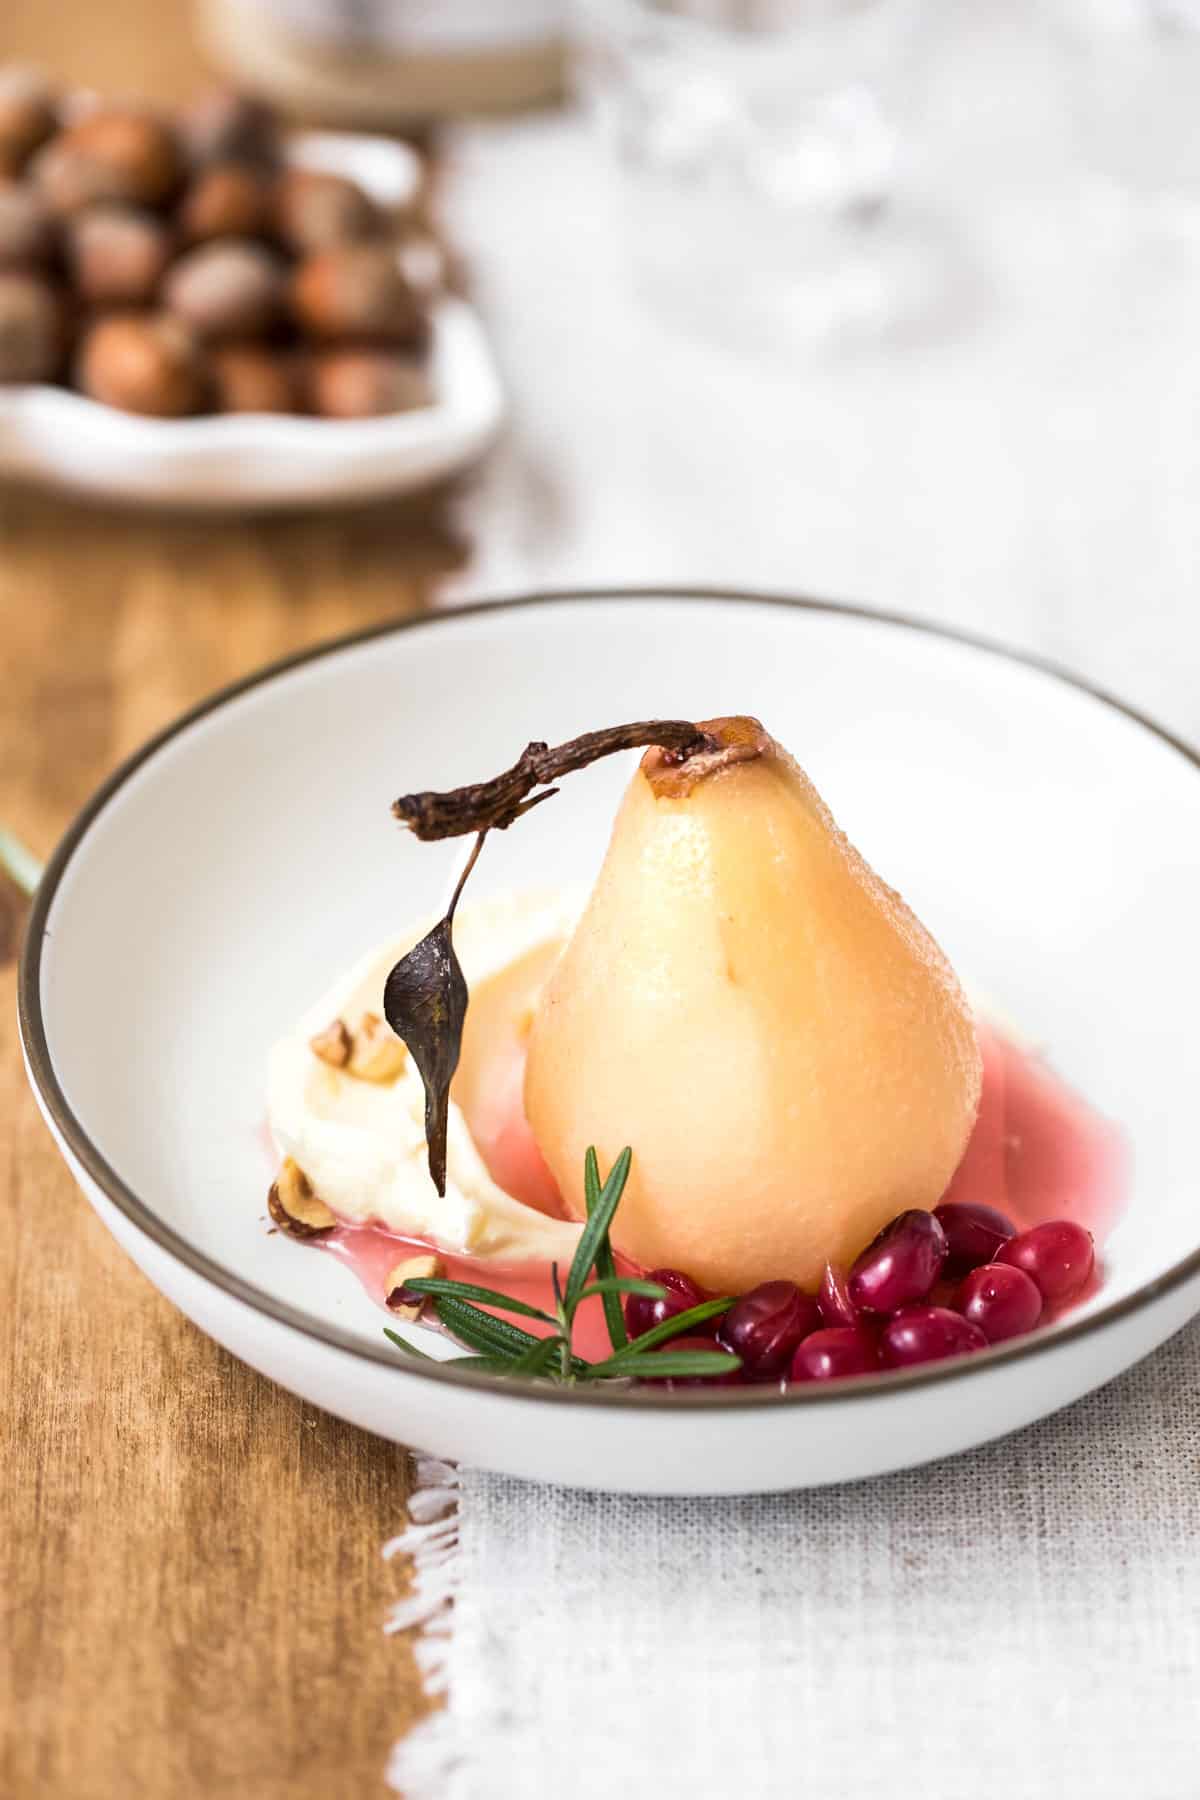 Cranberry poached pear on a plate from the front view.